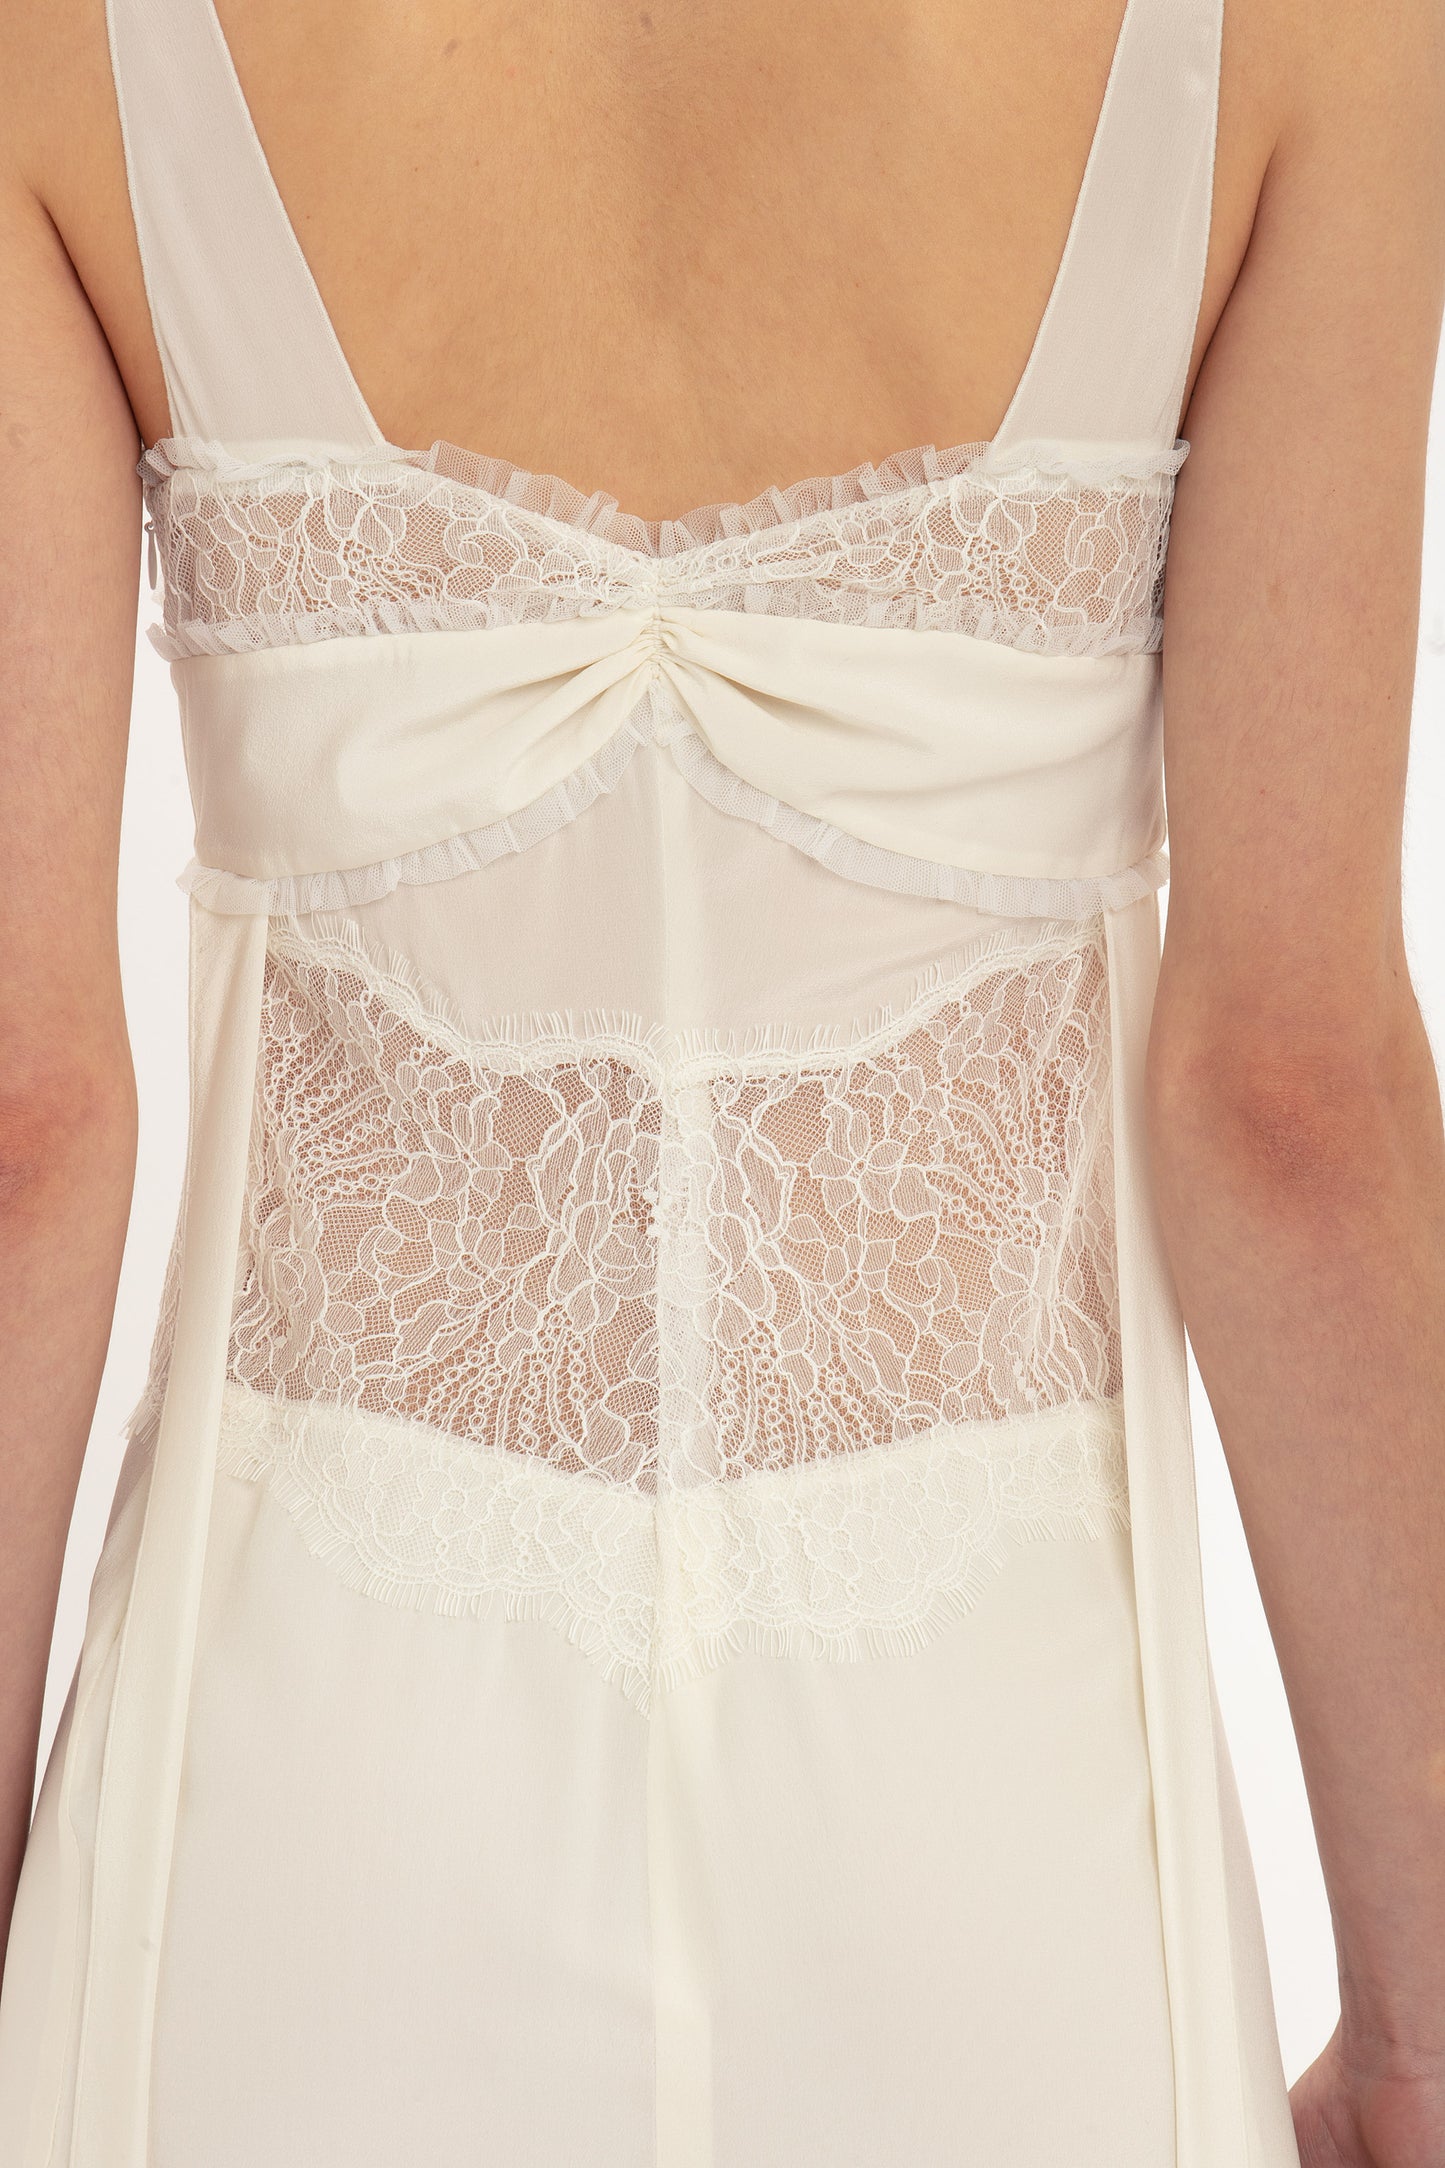 Back view of a person wearing a Victoria Beckham Ruffle Detail Midi Dress In Ivory, showing intricate tactile lace detailing and pleats on the upper and middle sections.